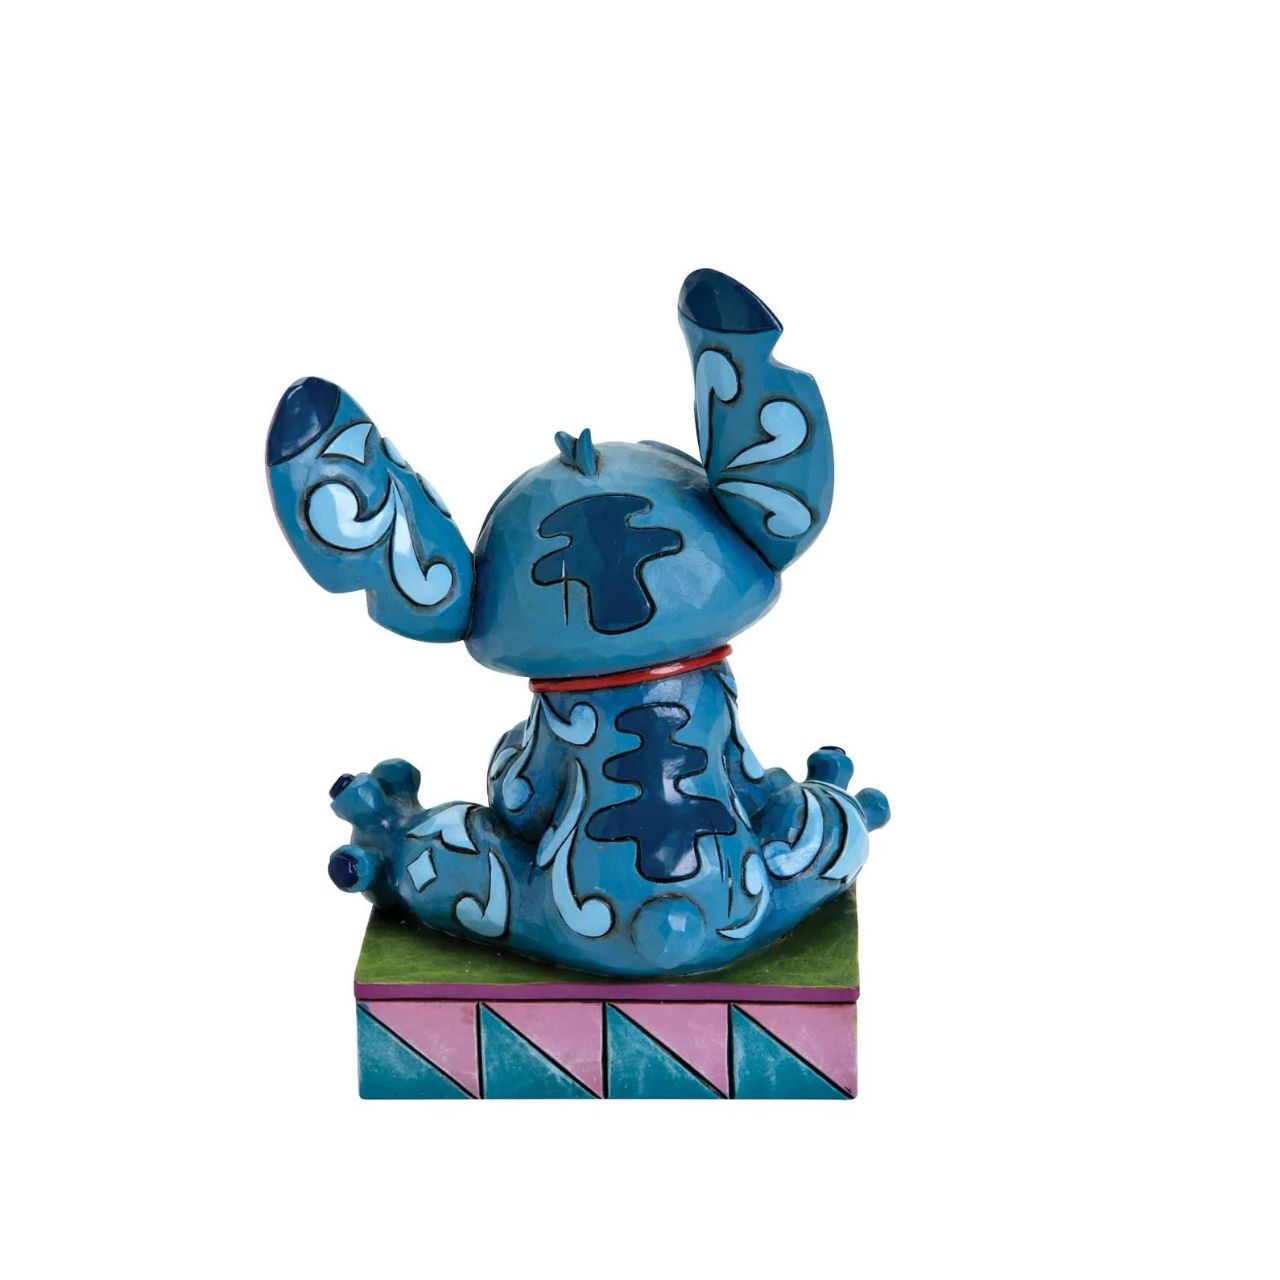 Disney Traditions Stitch Ohana Means Family  Designed by award winning artist and sculptor, Jim Shore for the Disney Traditions brand, this Stitch figurine is a part of a personality poses collection. He is featured displaying his typical mischievous smile.